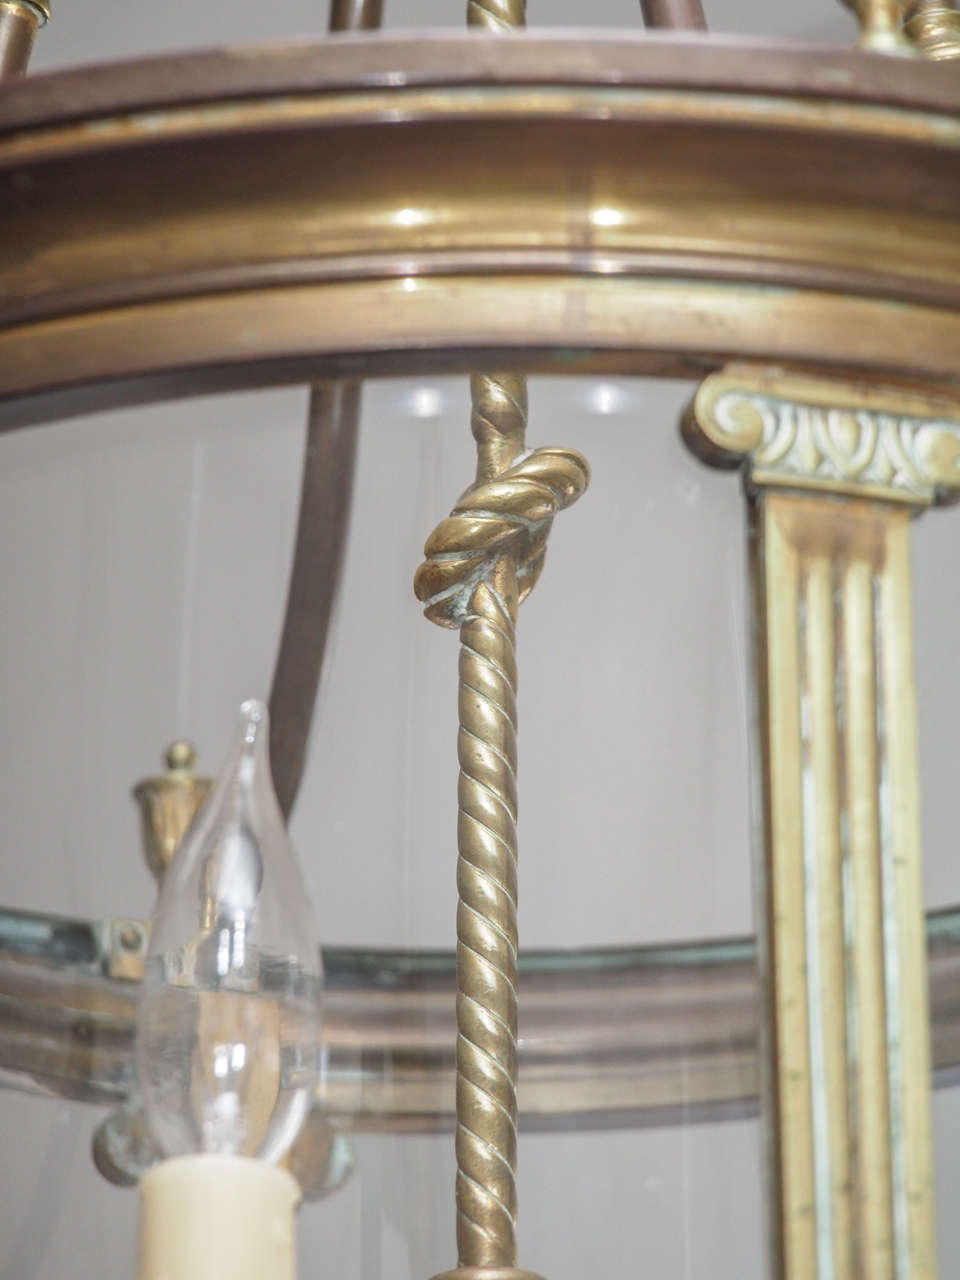 Mid-20th Century French Cylindrical Glass Paneled and Brass Lantern & Ionic Columns For Sale